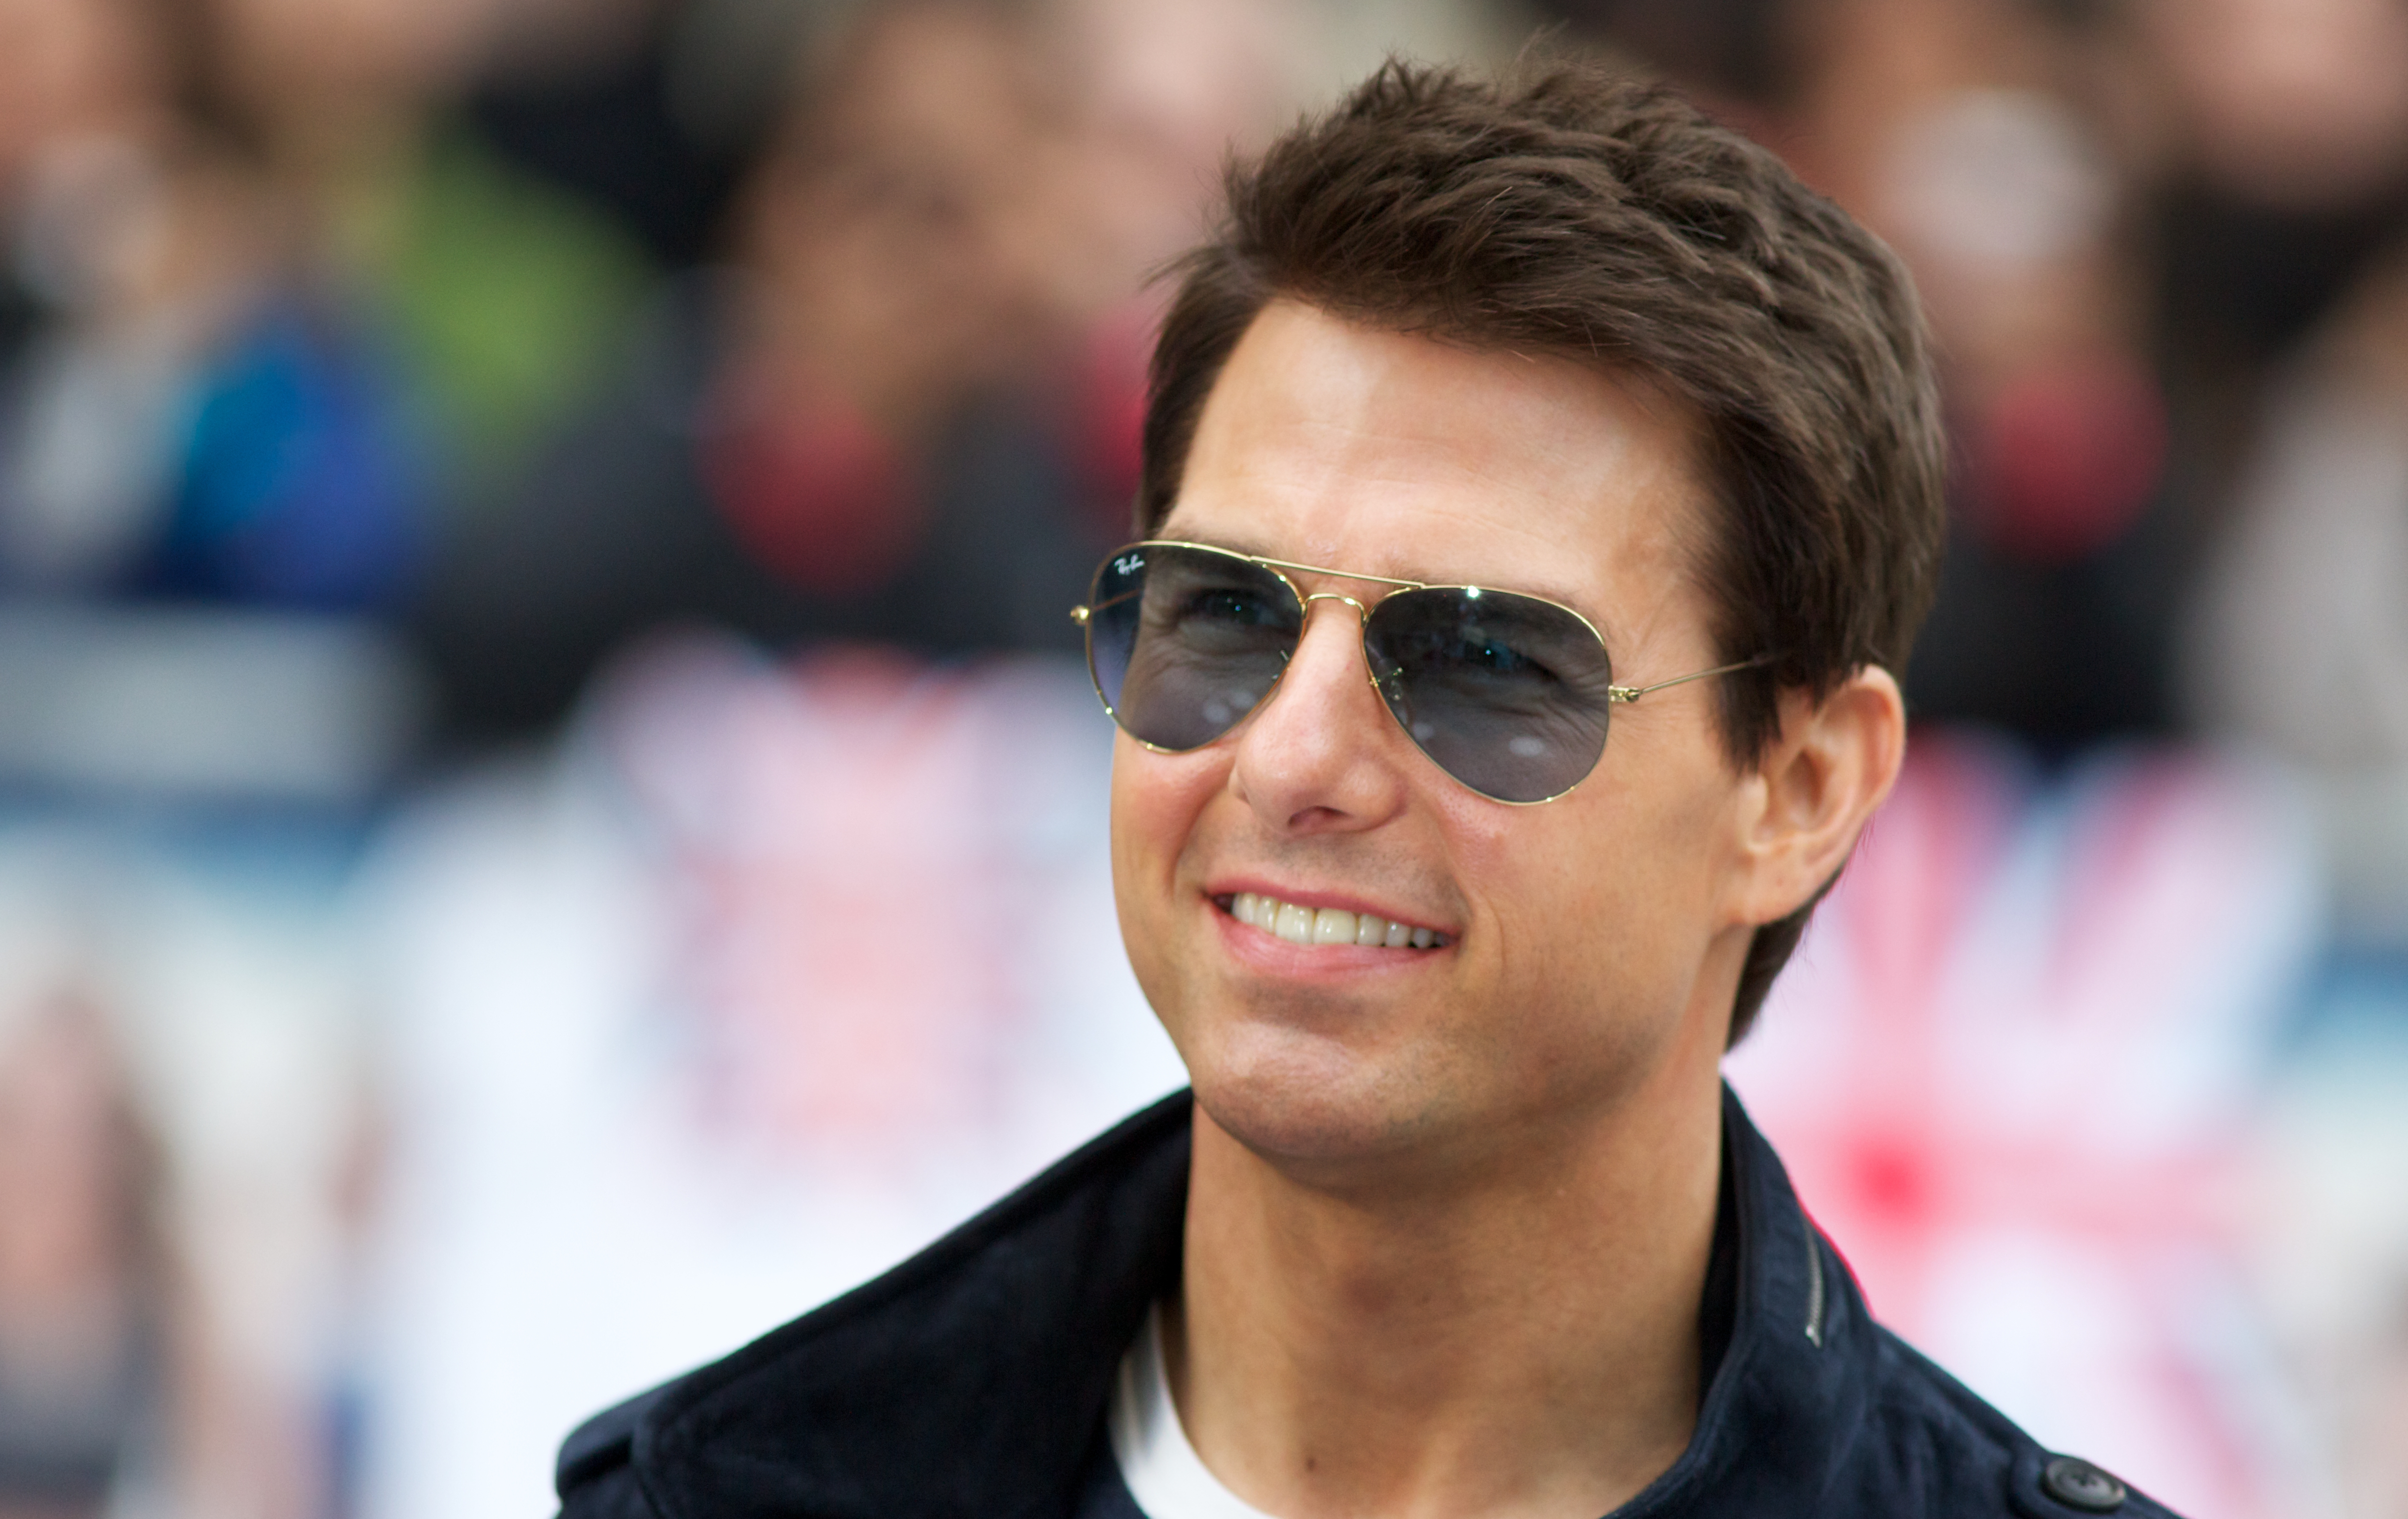 Tom Cruise Wallpaper Image Photos Pictures Background